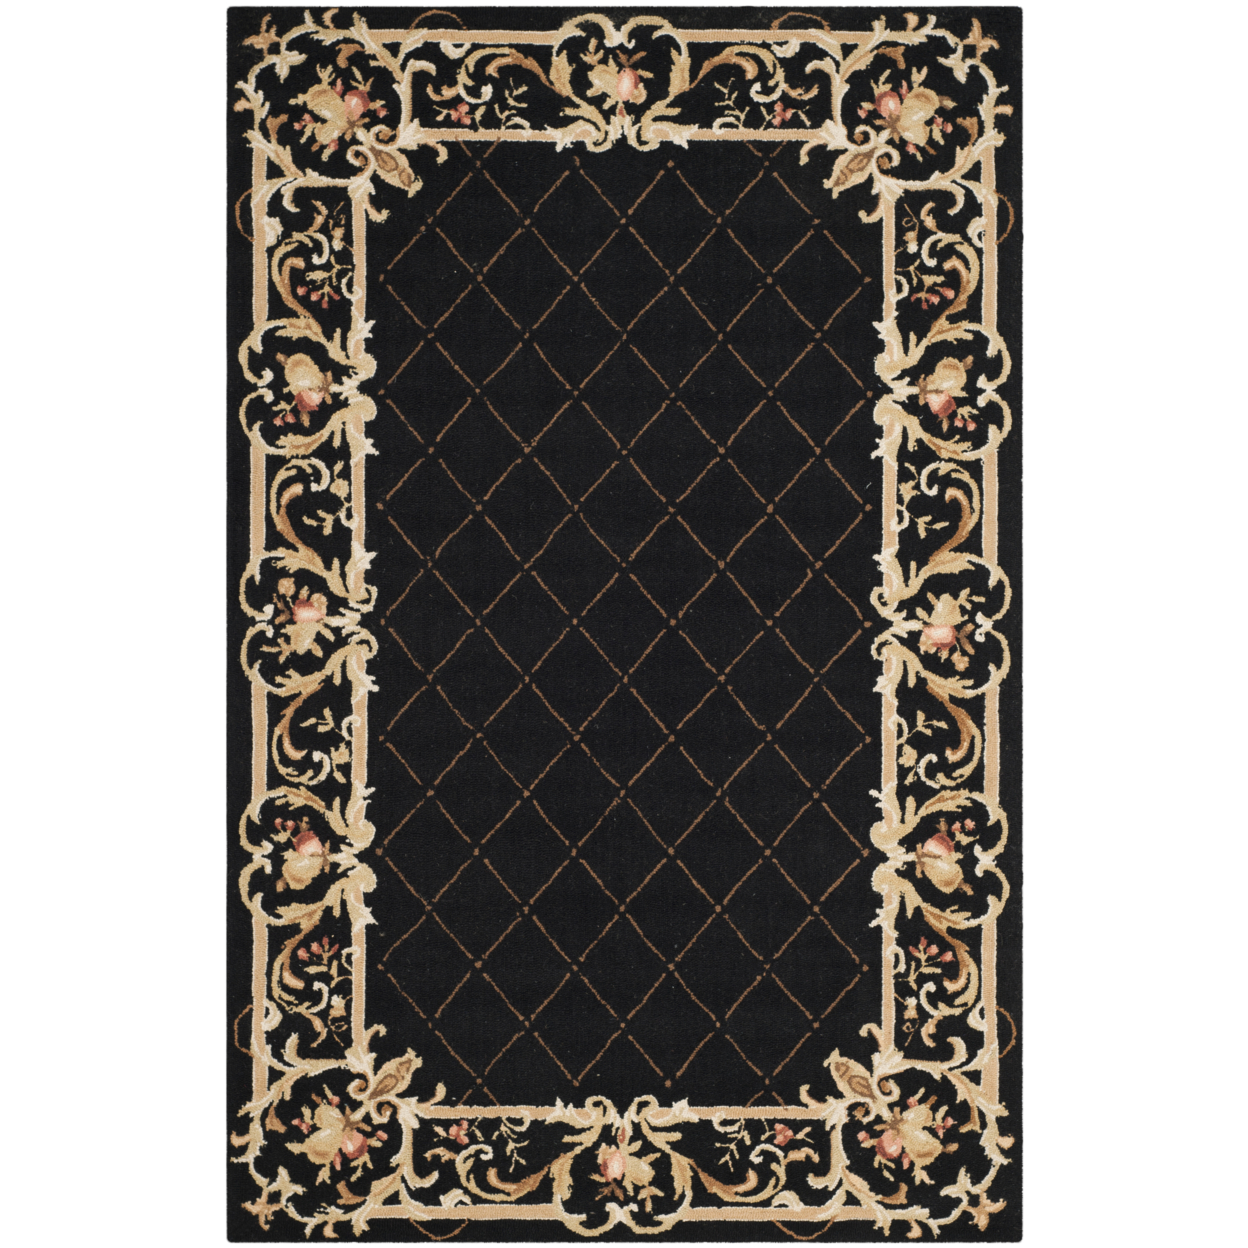 SAFAVIEH Chelsea Collection HK333B Hand-hooked Black Rug - 8' 9 X 11' 9